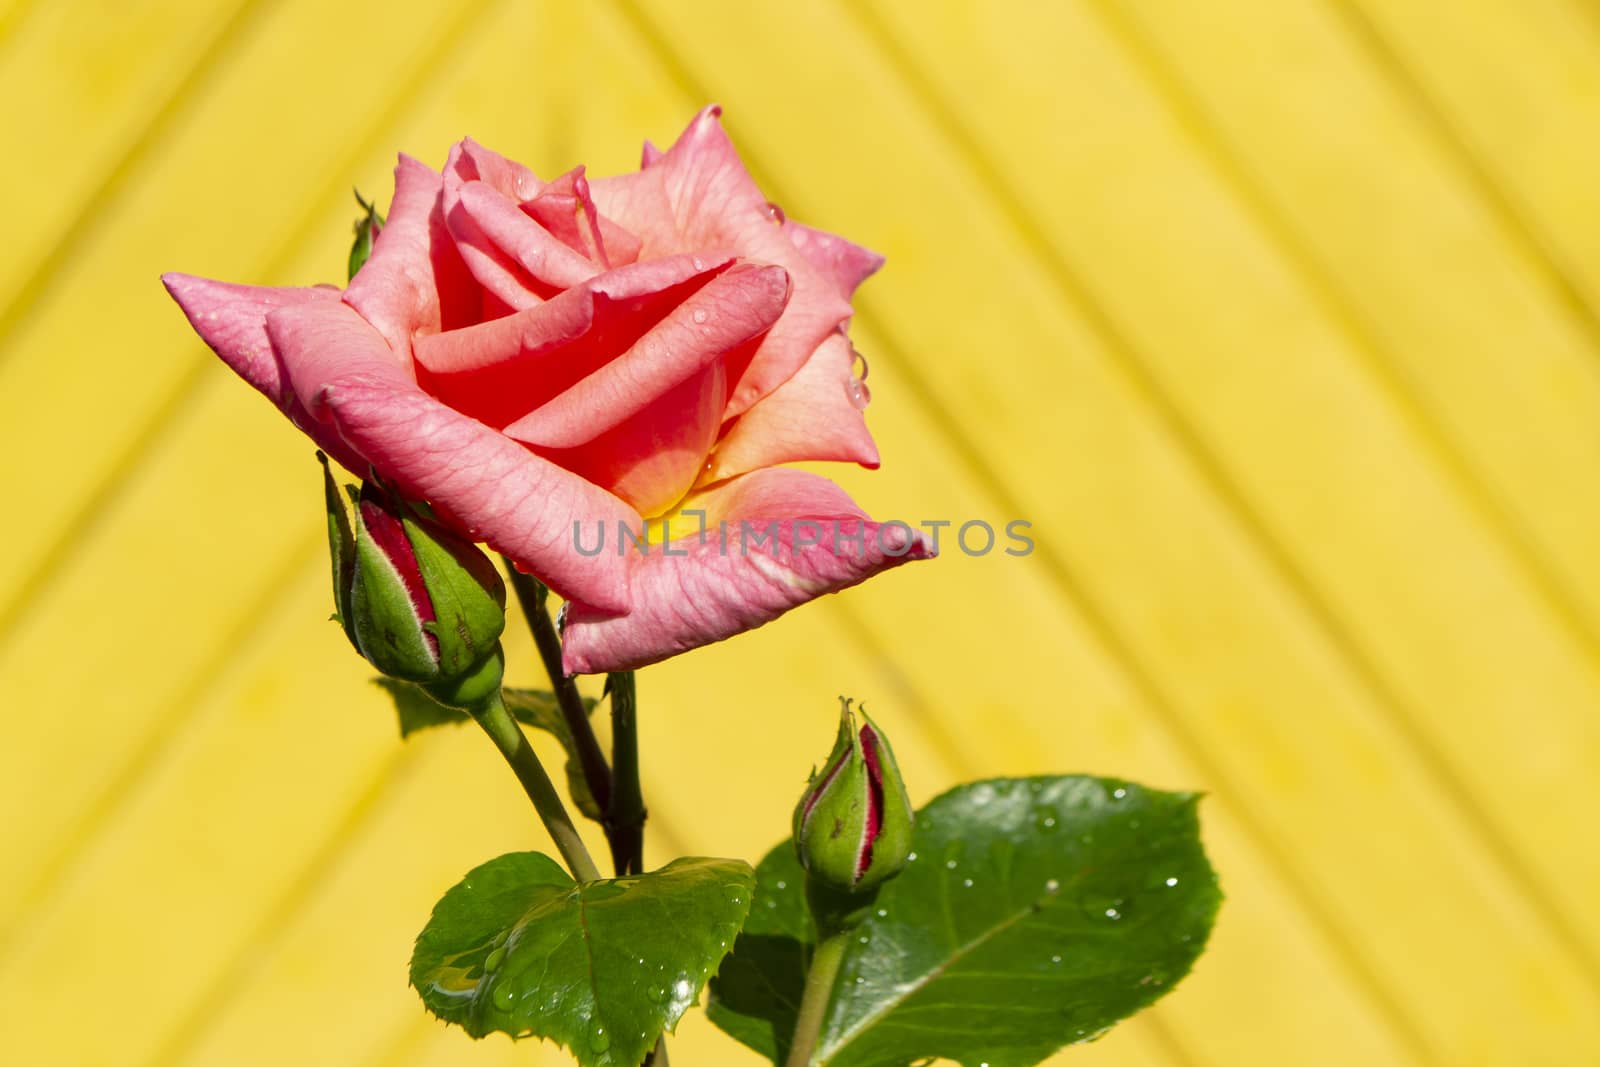 Yellow plank wooden background and tender pink rose closeup in sunny day